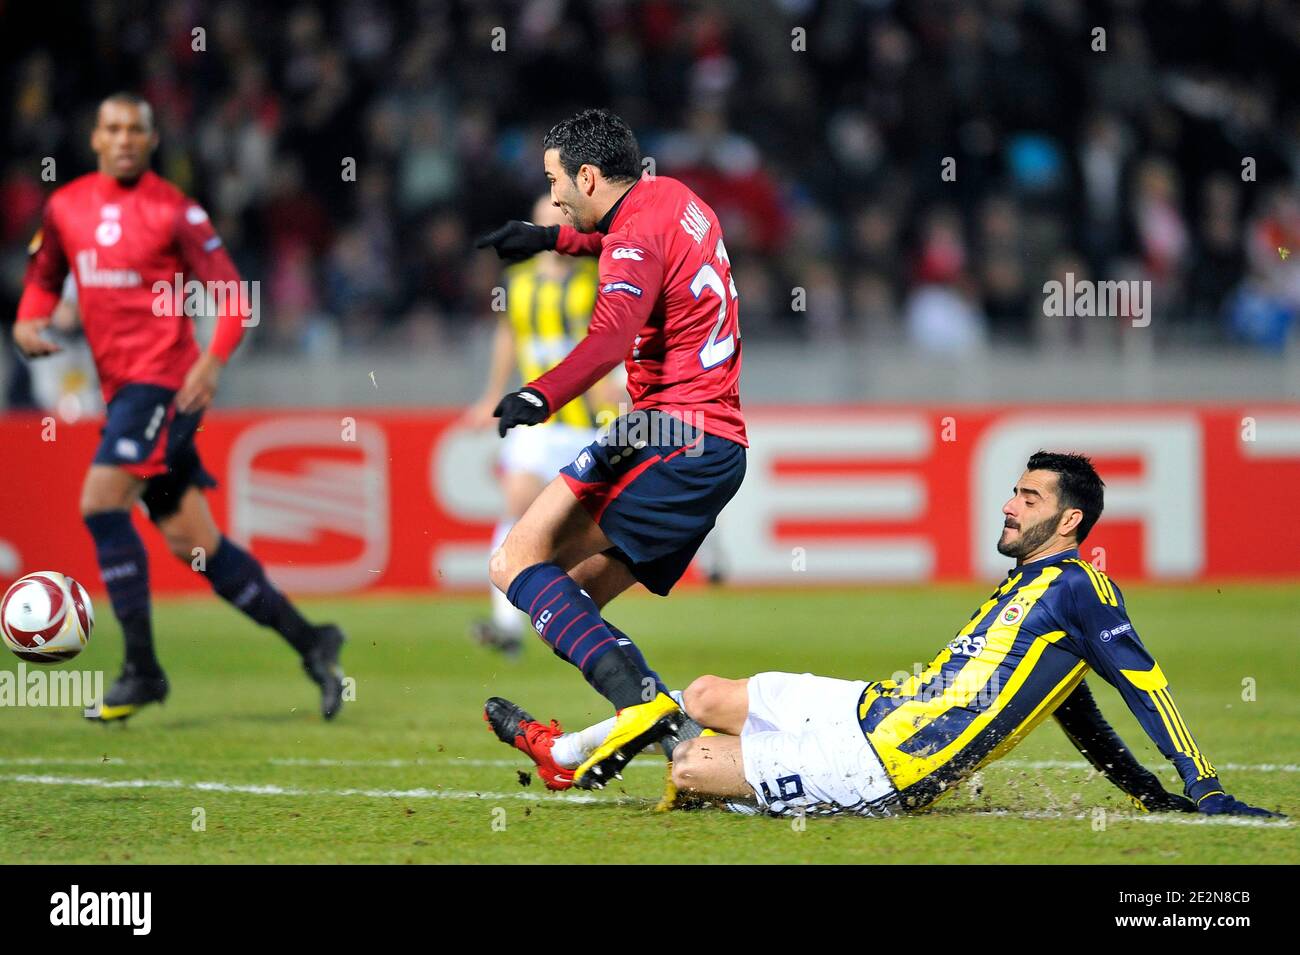 Lille's Adil Rami and Fenerbahce's Daniel Guiza during the UEFA Europa League soccer match, LOSC Lille Metropole vs Fenerbahce SK at the Stadium Nord in Villeneuve d'Ascq, France on February 18, 2010. Lille won 2-1. Photo by Stephane Reix/ABACAPRESS.COM Stock Photo